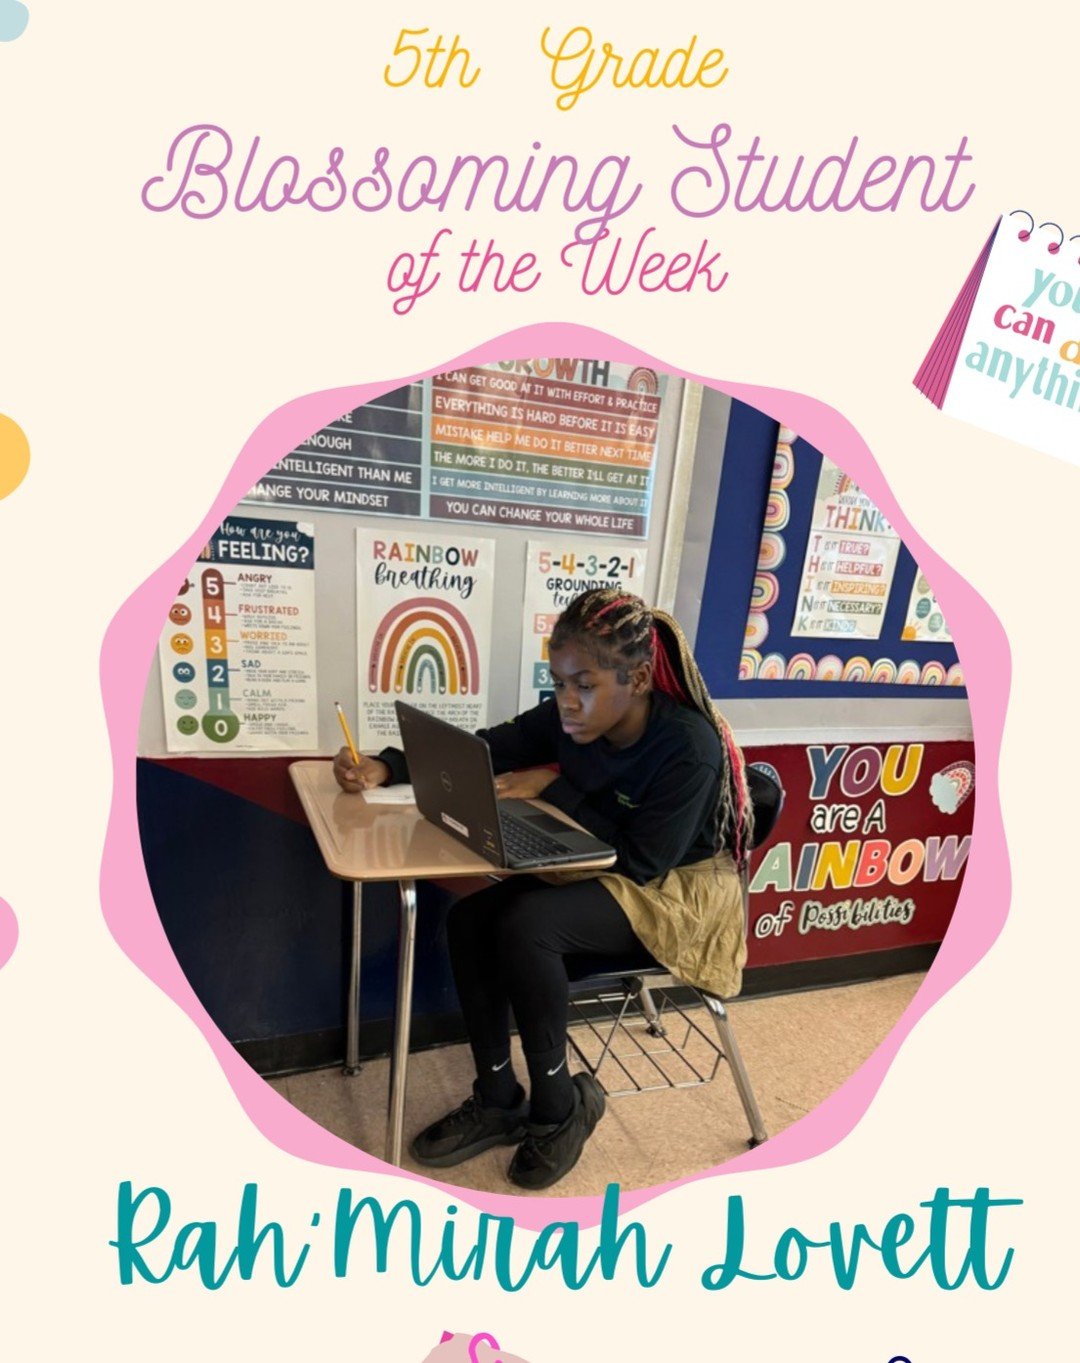 🎉🌟 Last week, our 5th grade team celebrated their &quot;Blossoming Student of The Week,&quot; Rah'Mirah Lovett! 🌸

&quot;Rah'Mirah has shown tremendous growth throughout her time in 5th grade. Her TENACITY has shined bright. Her perseverance to fi